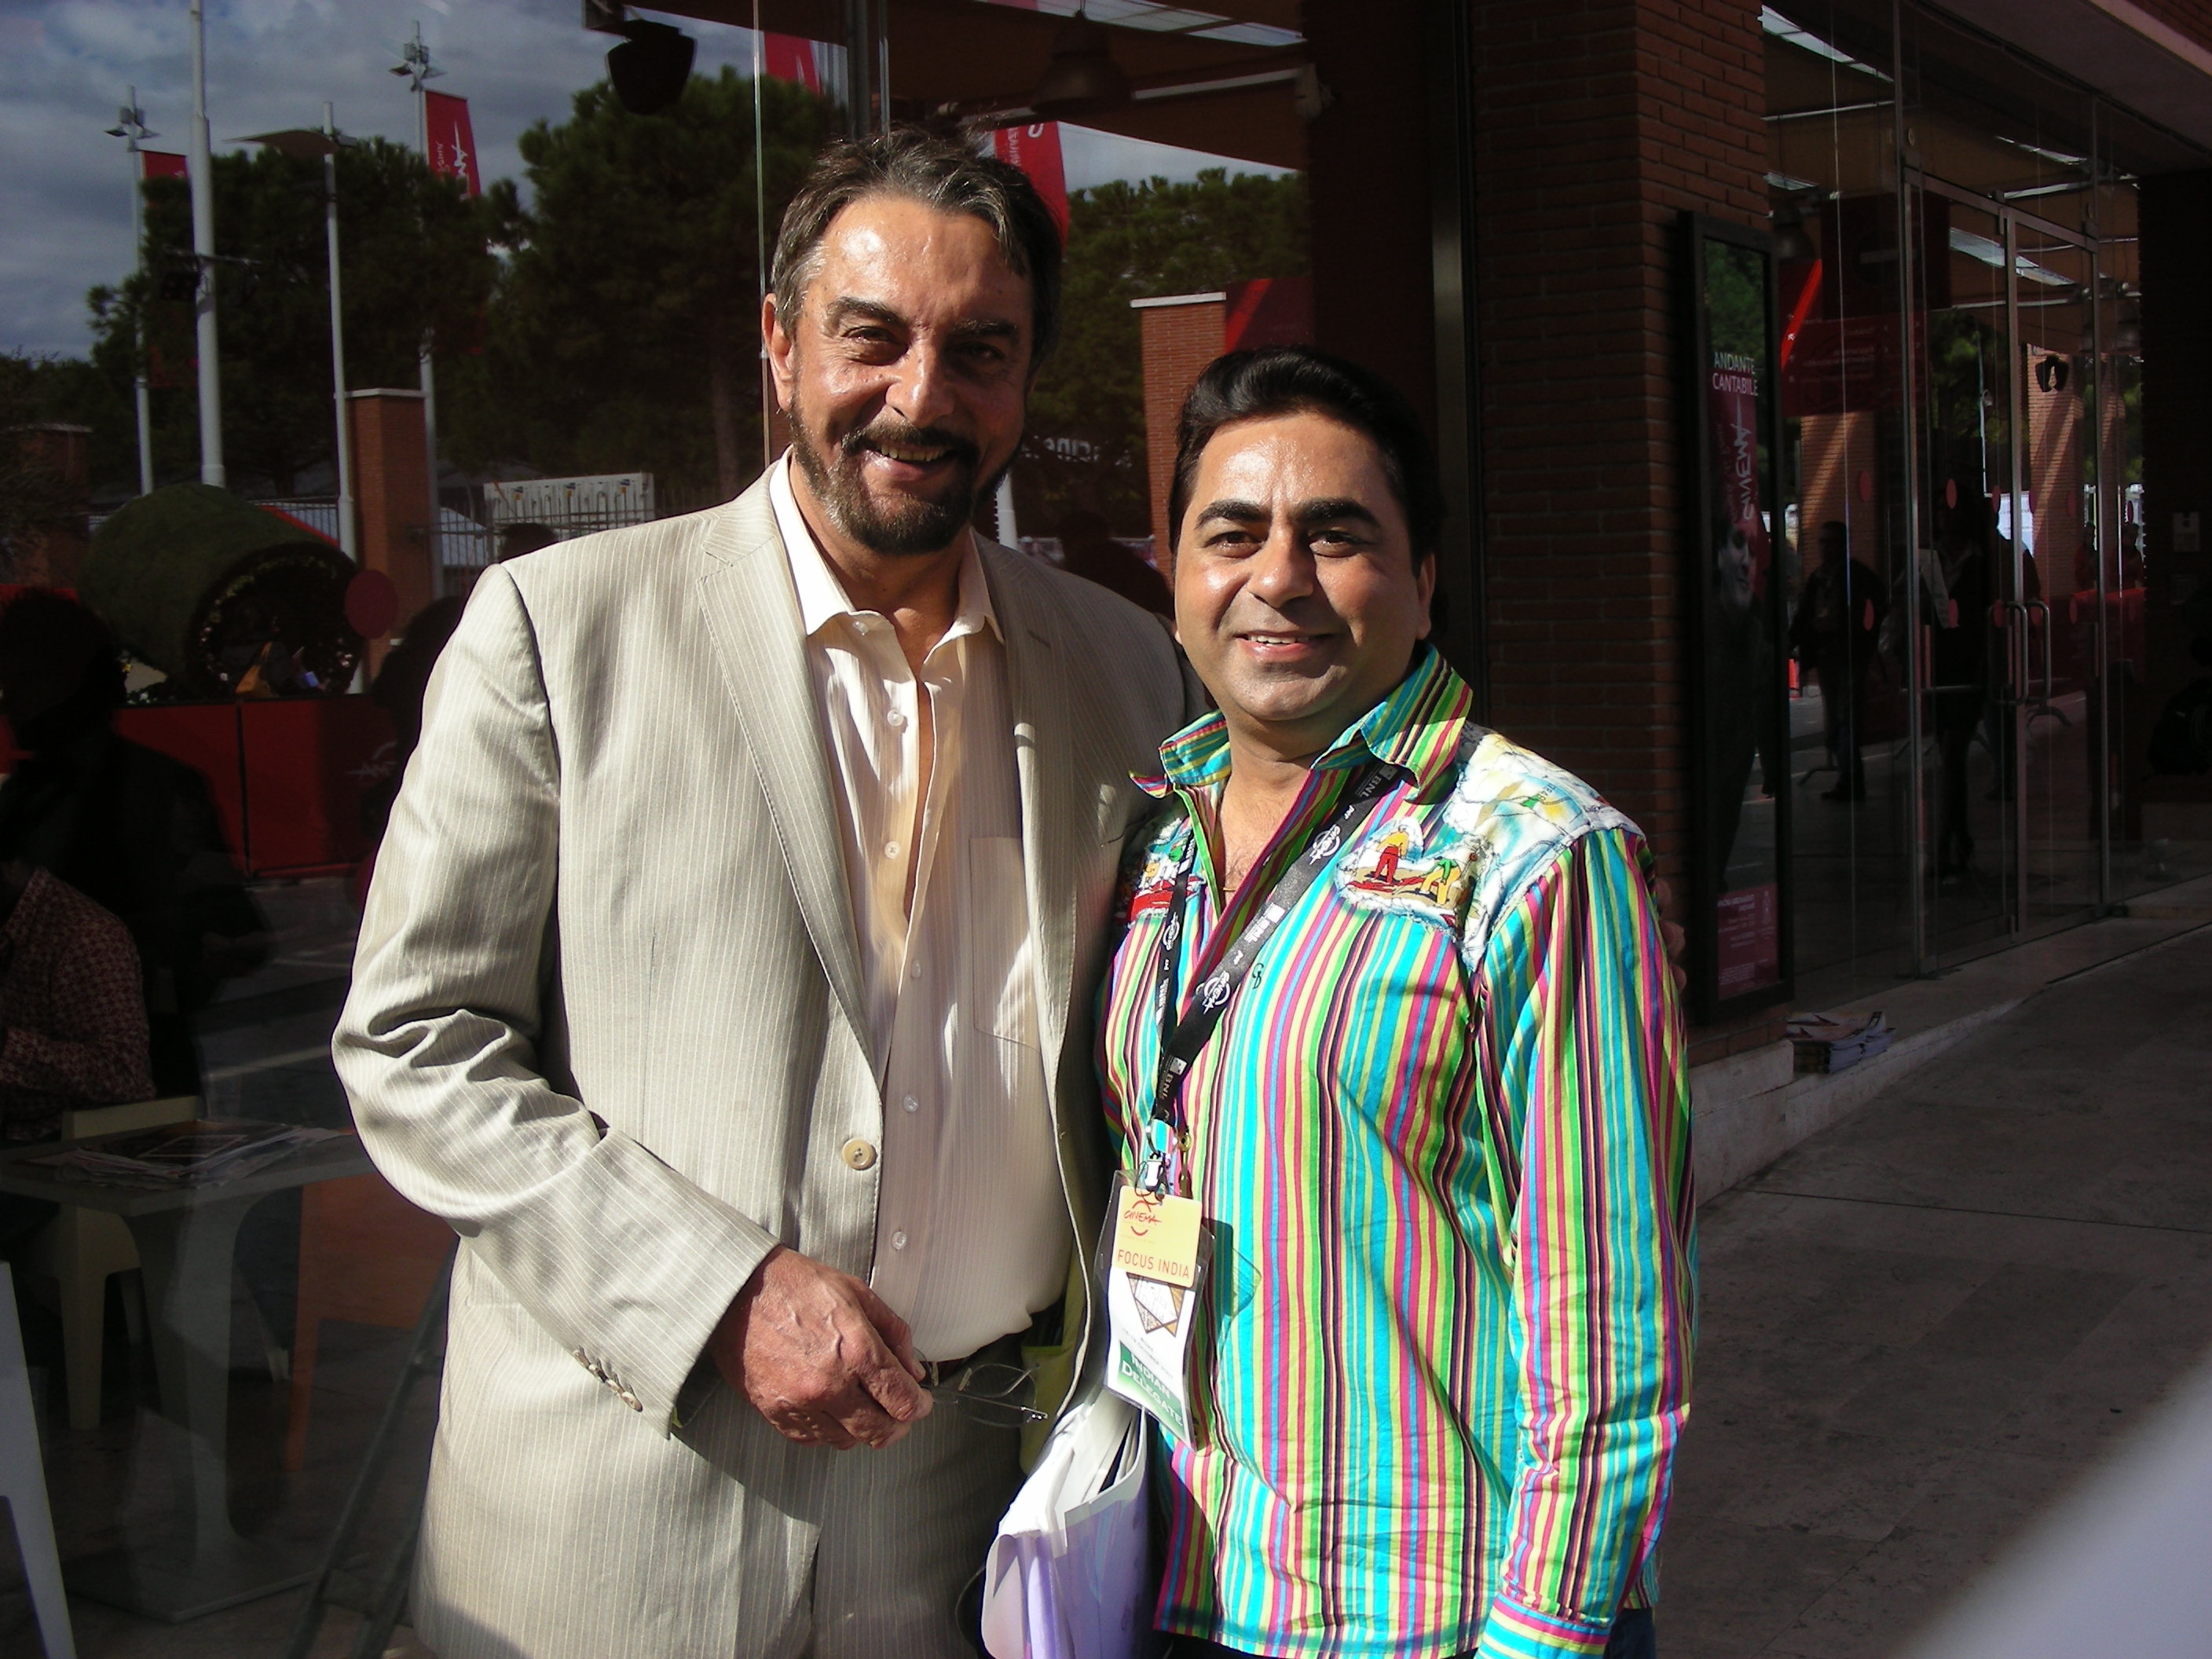 Oct 19, 2007 With International Actor Kabir Bedi At Rome Film Festival Rome, Italy